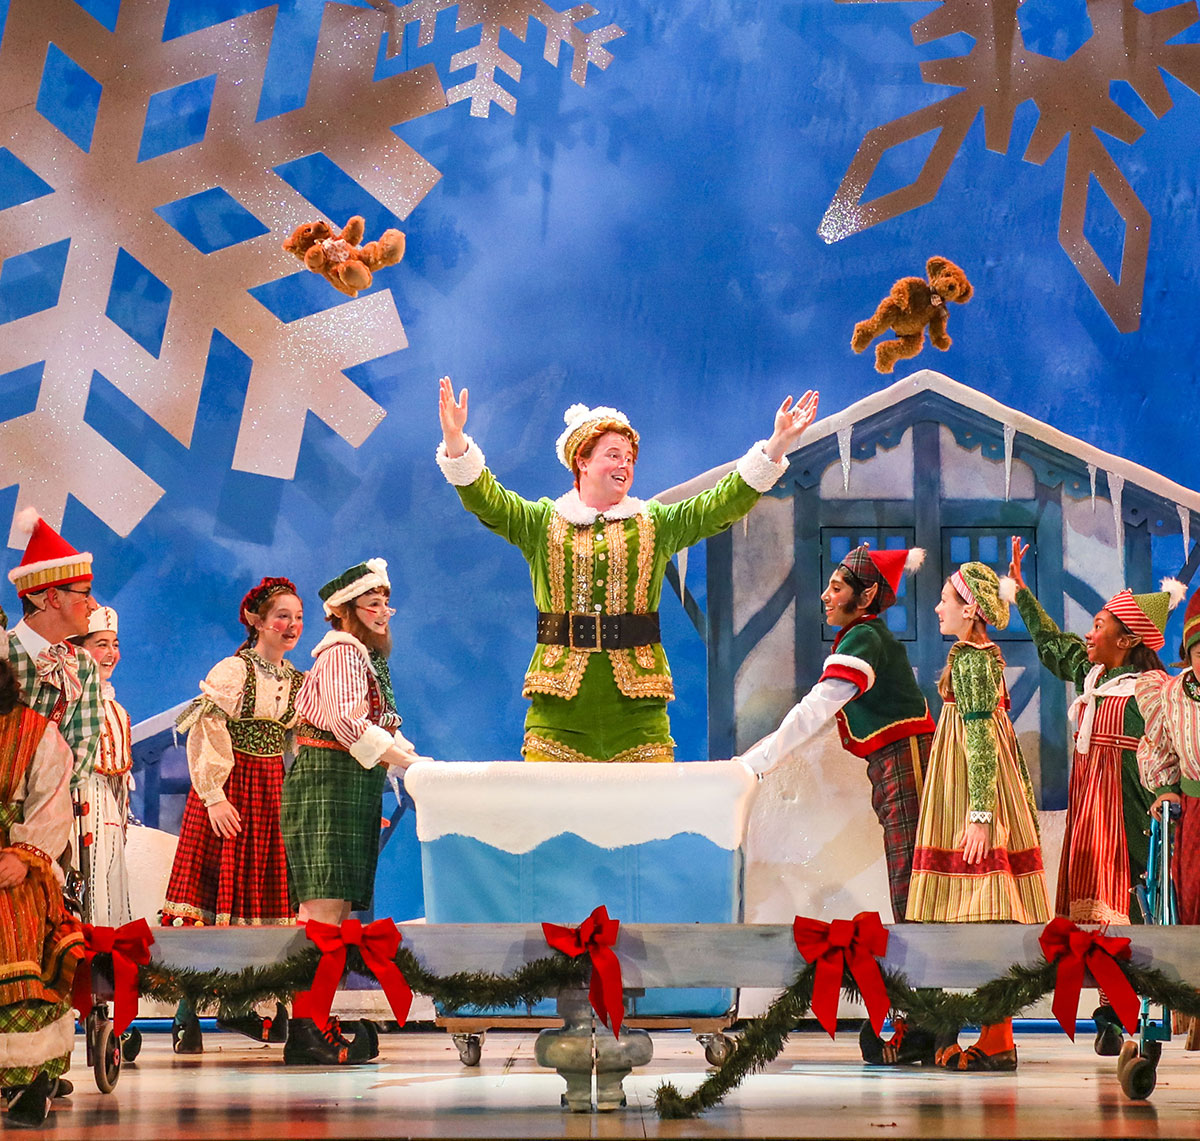 PHOTO: Quinn VanAntwerp as “Buddy” and the cast of the Theatre Under The Stars production of Elf - The Musical. Photo by Melissa Taylor, courtesy of TUTS.